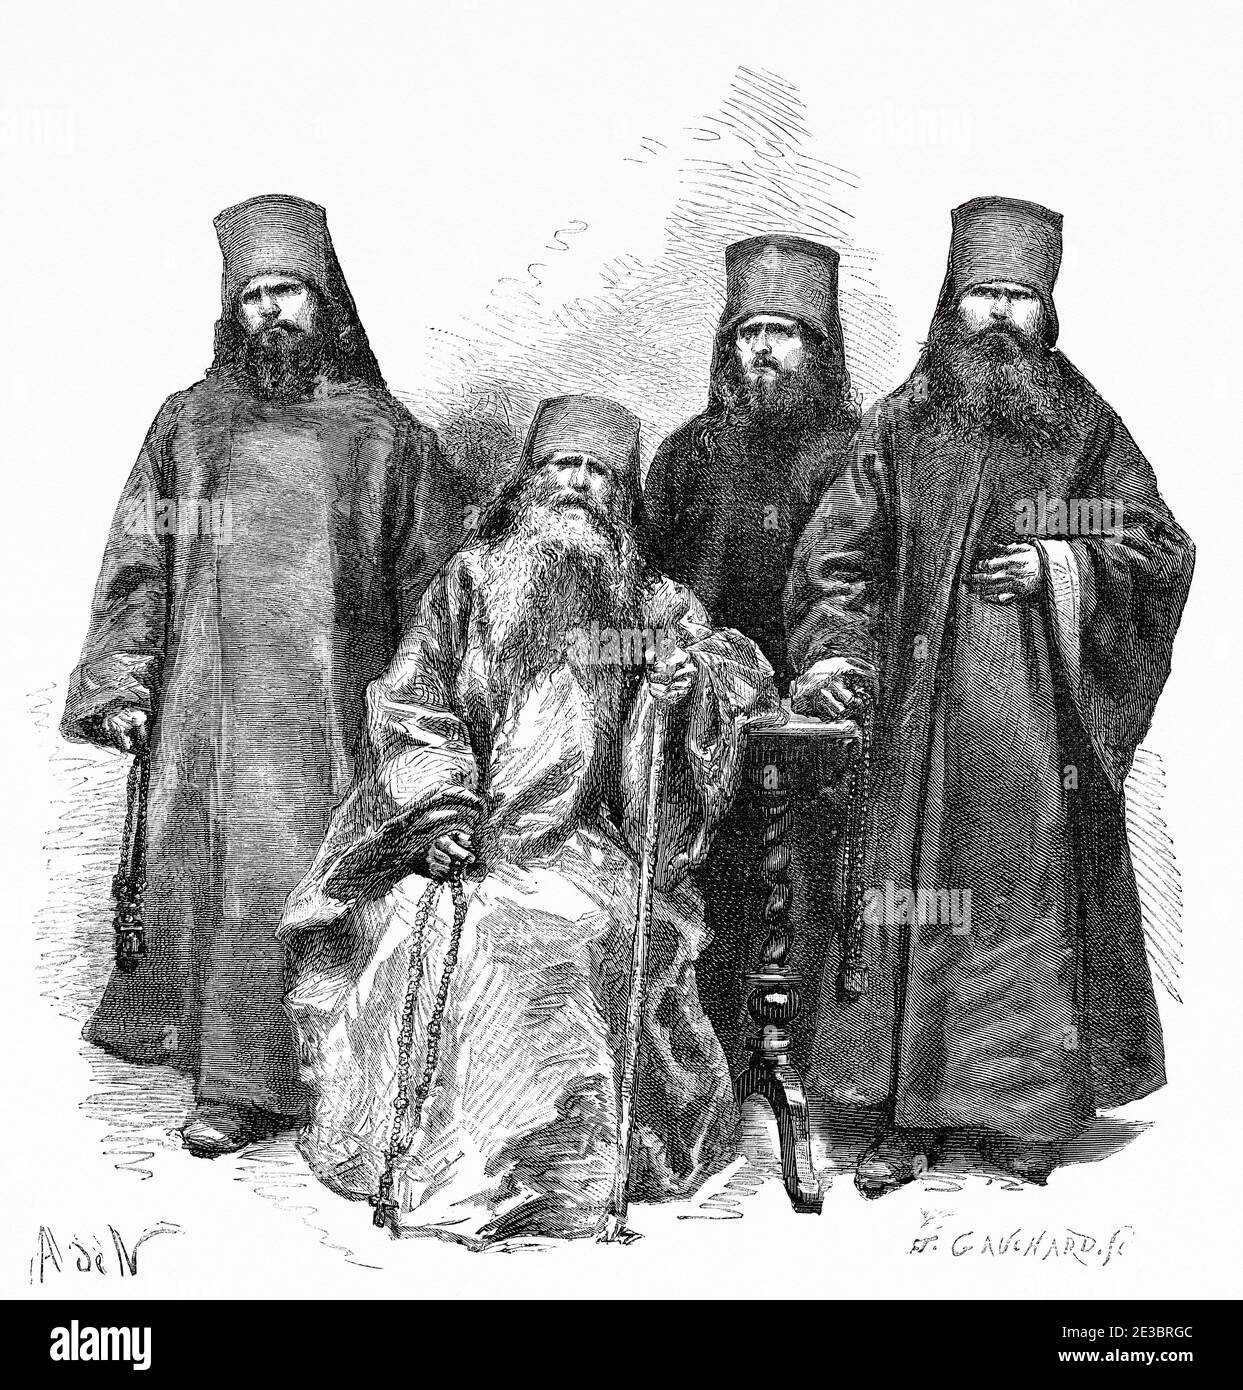 Filaret Drozdov and his three sons. Metropolitan of Moscow, the most influential figure in the Russian Orthodox Church, Russia. Old engraving illustration, Travel to Free Russia 1869 by William Hepworth Dixon Stock Photo